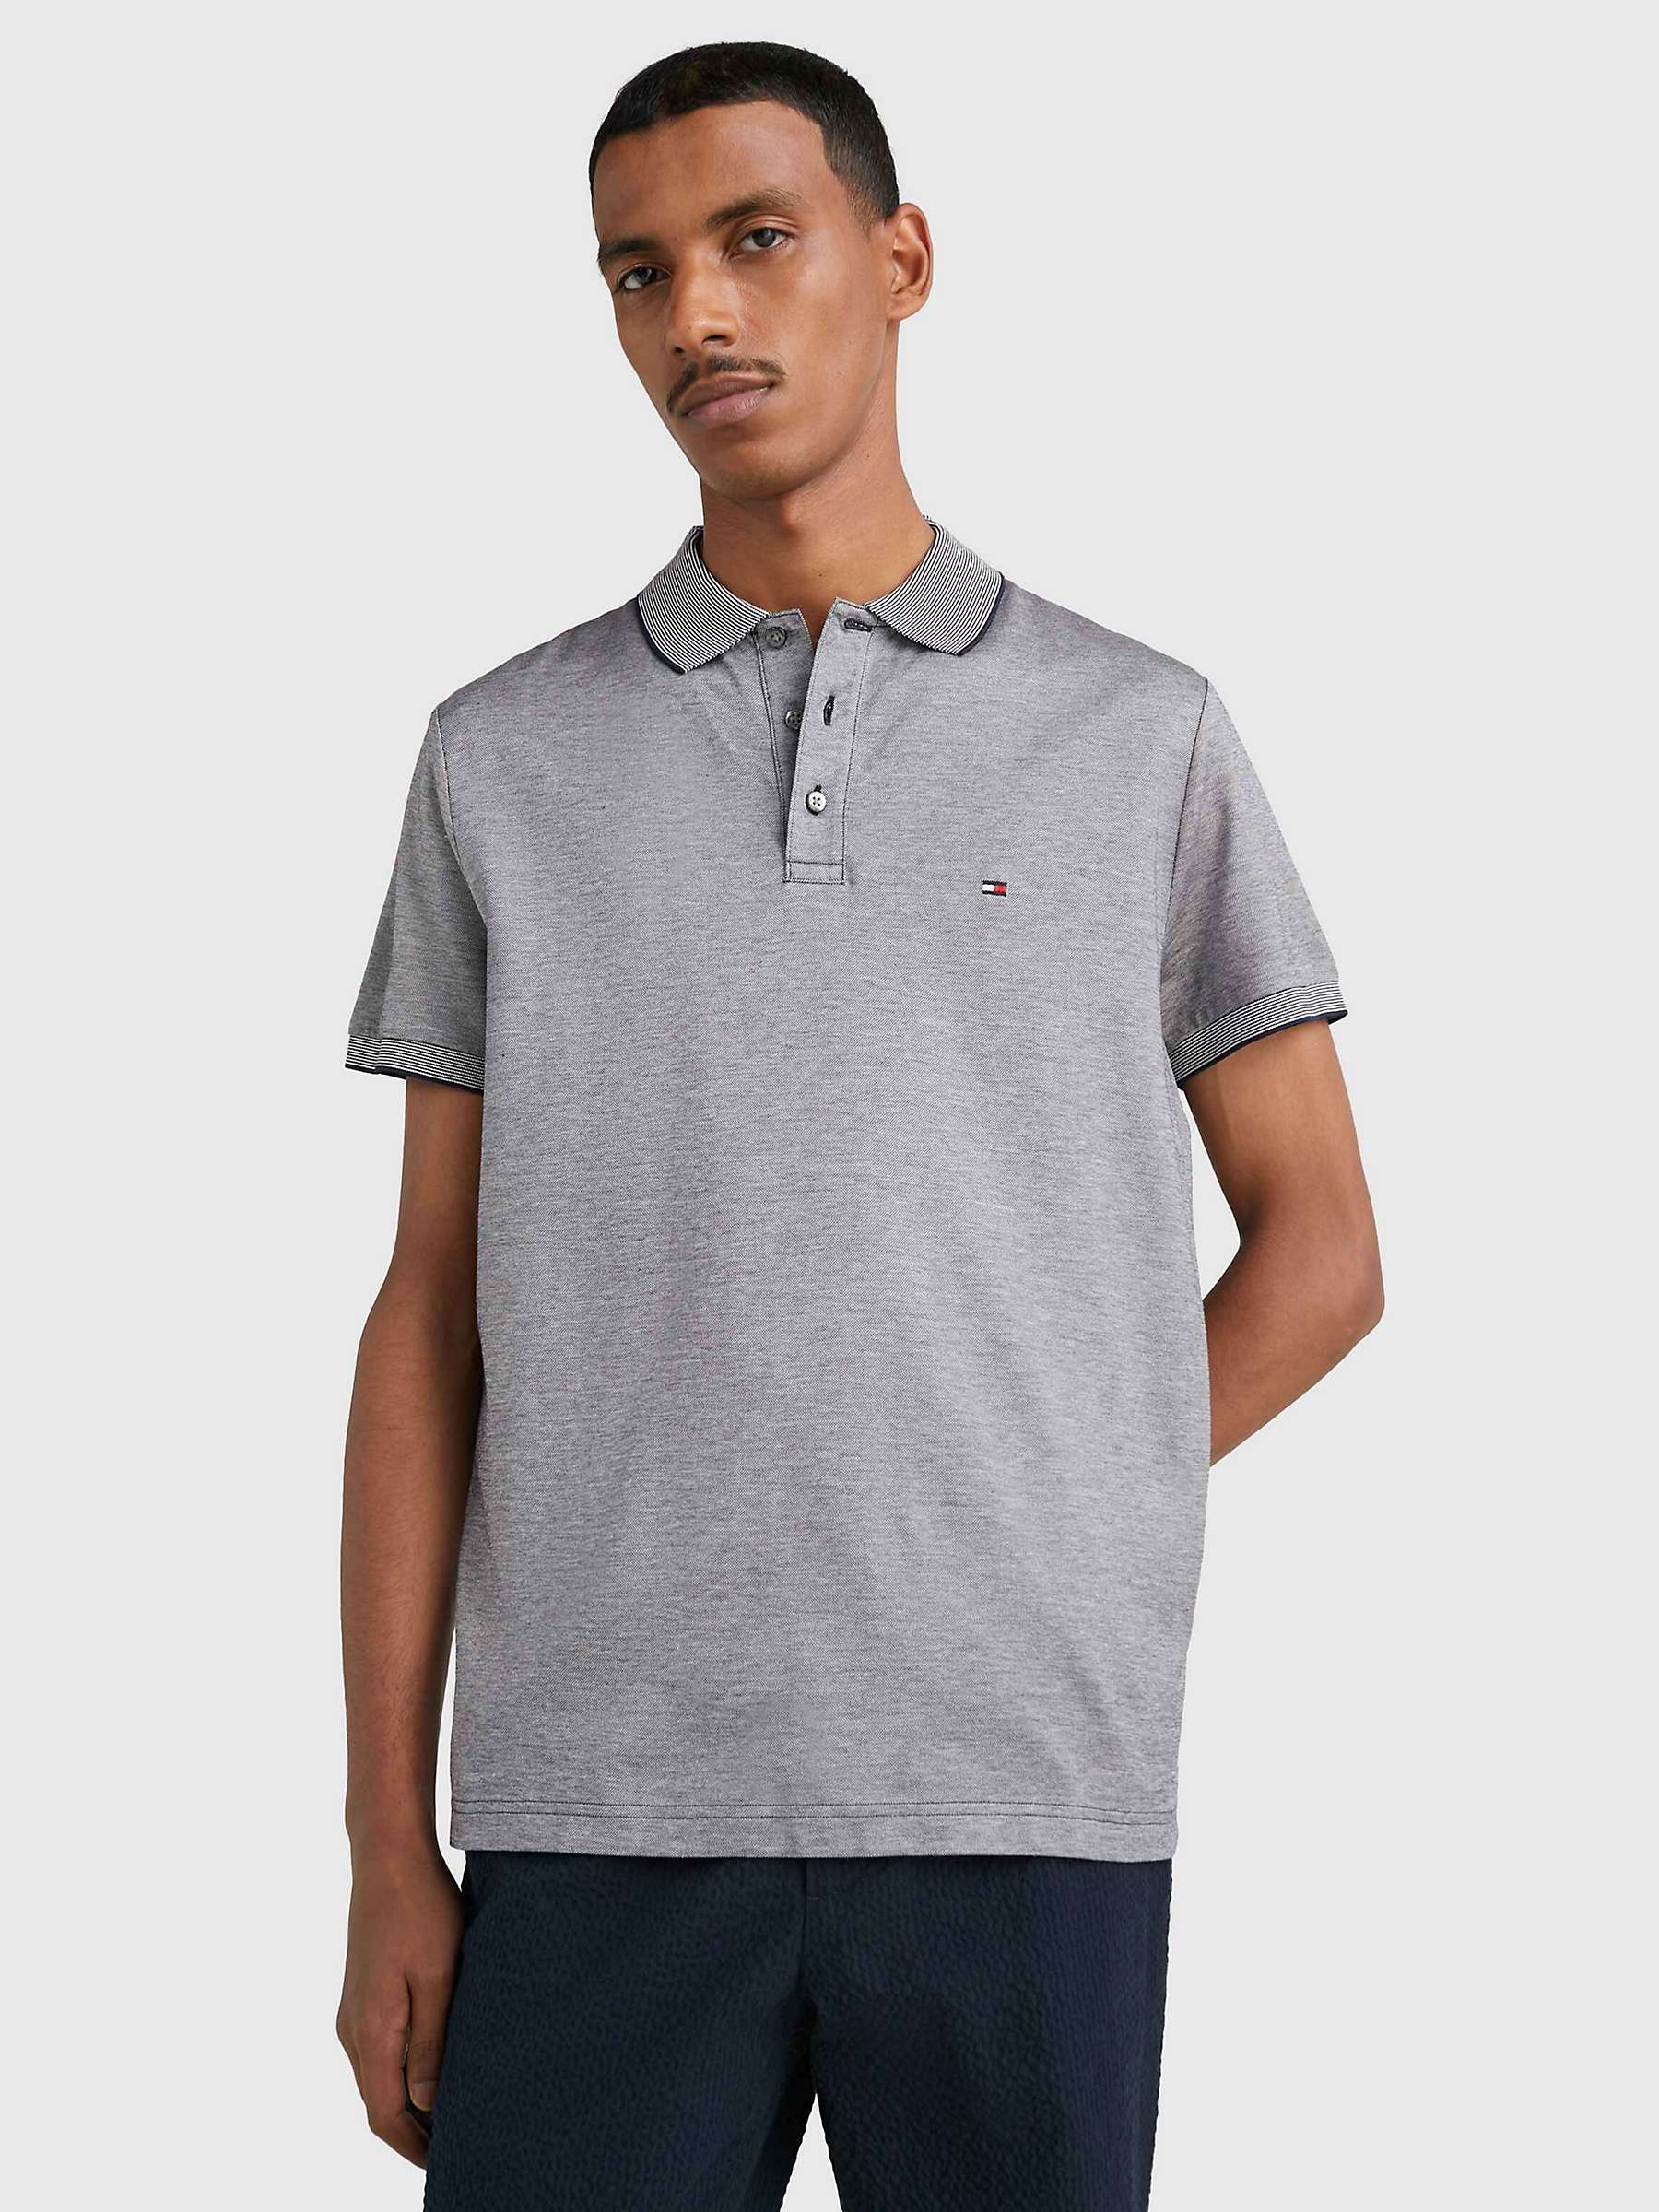 Buy Tommy Hilfiger Oxford Logo Collar Polo Shirt Online at johnlewis.com